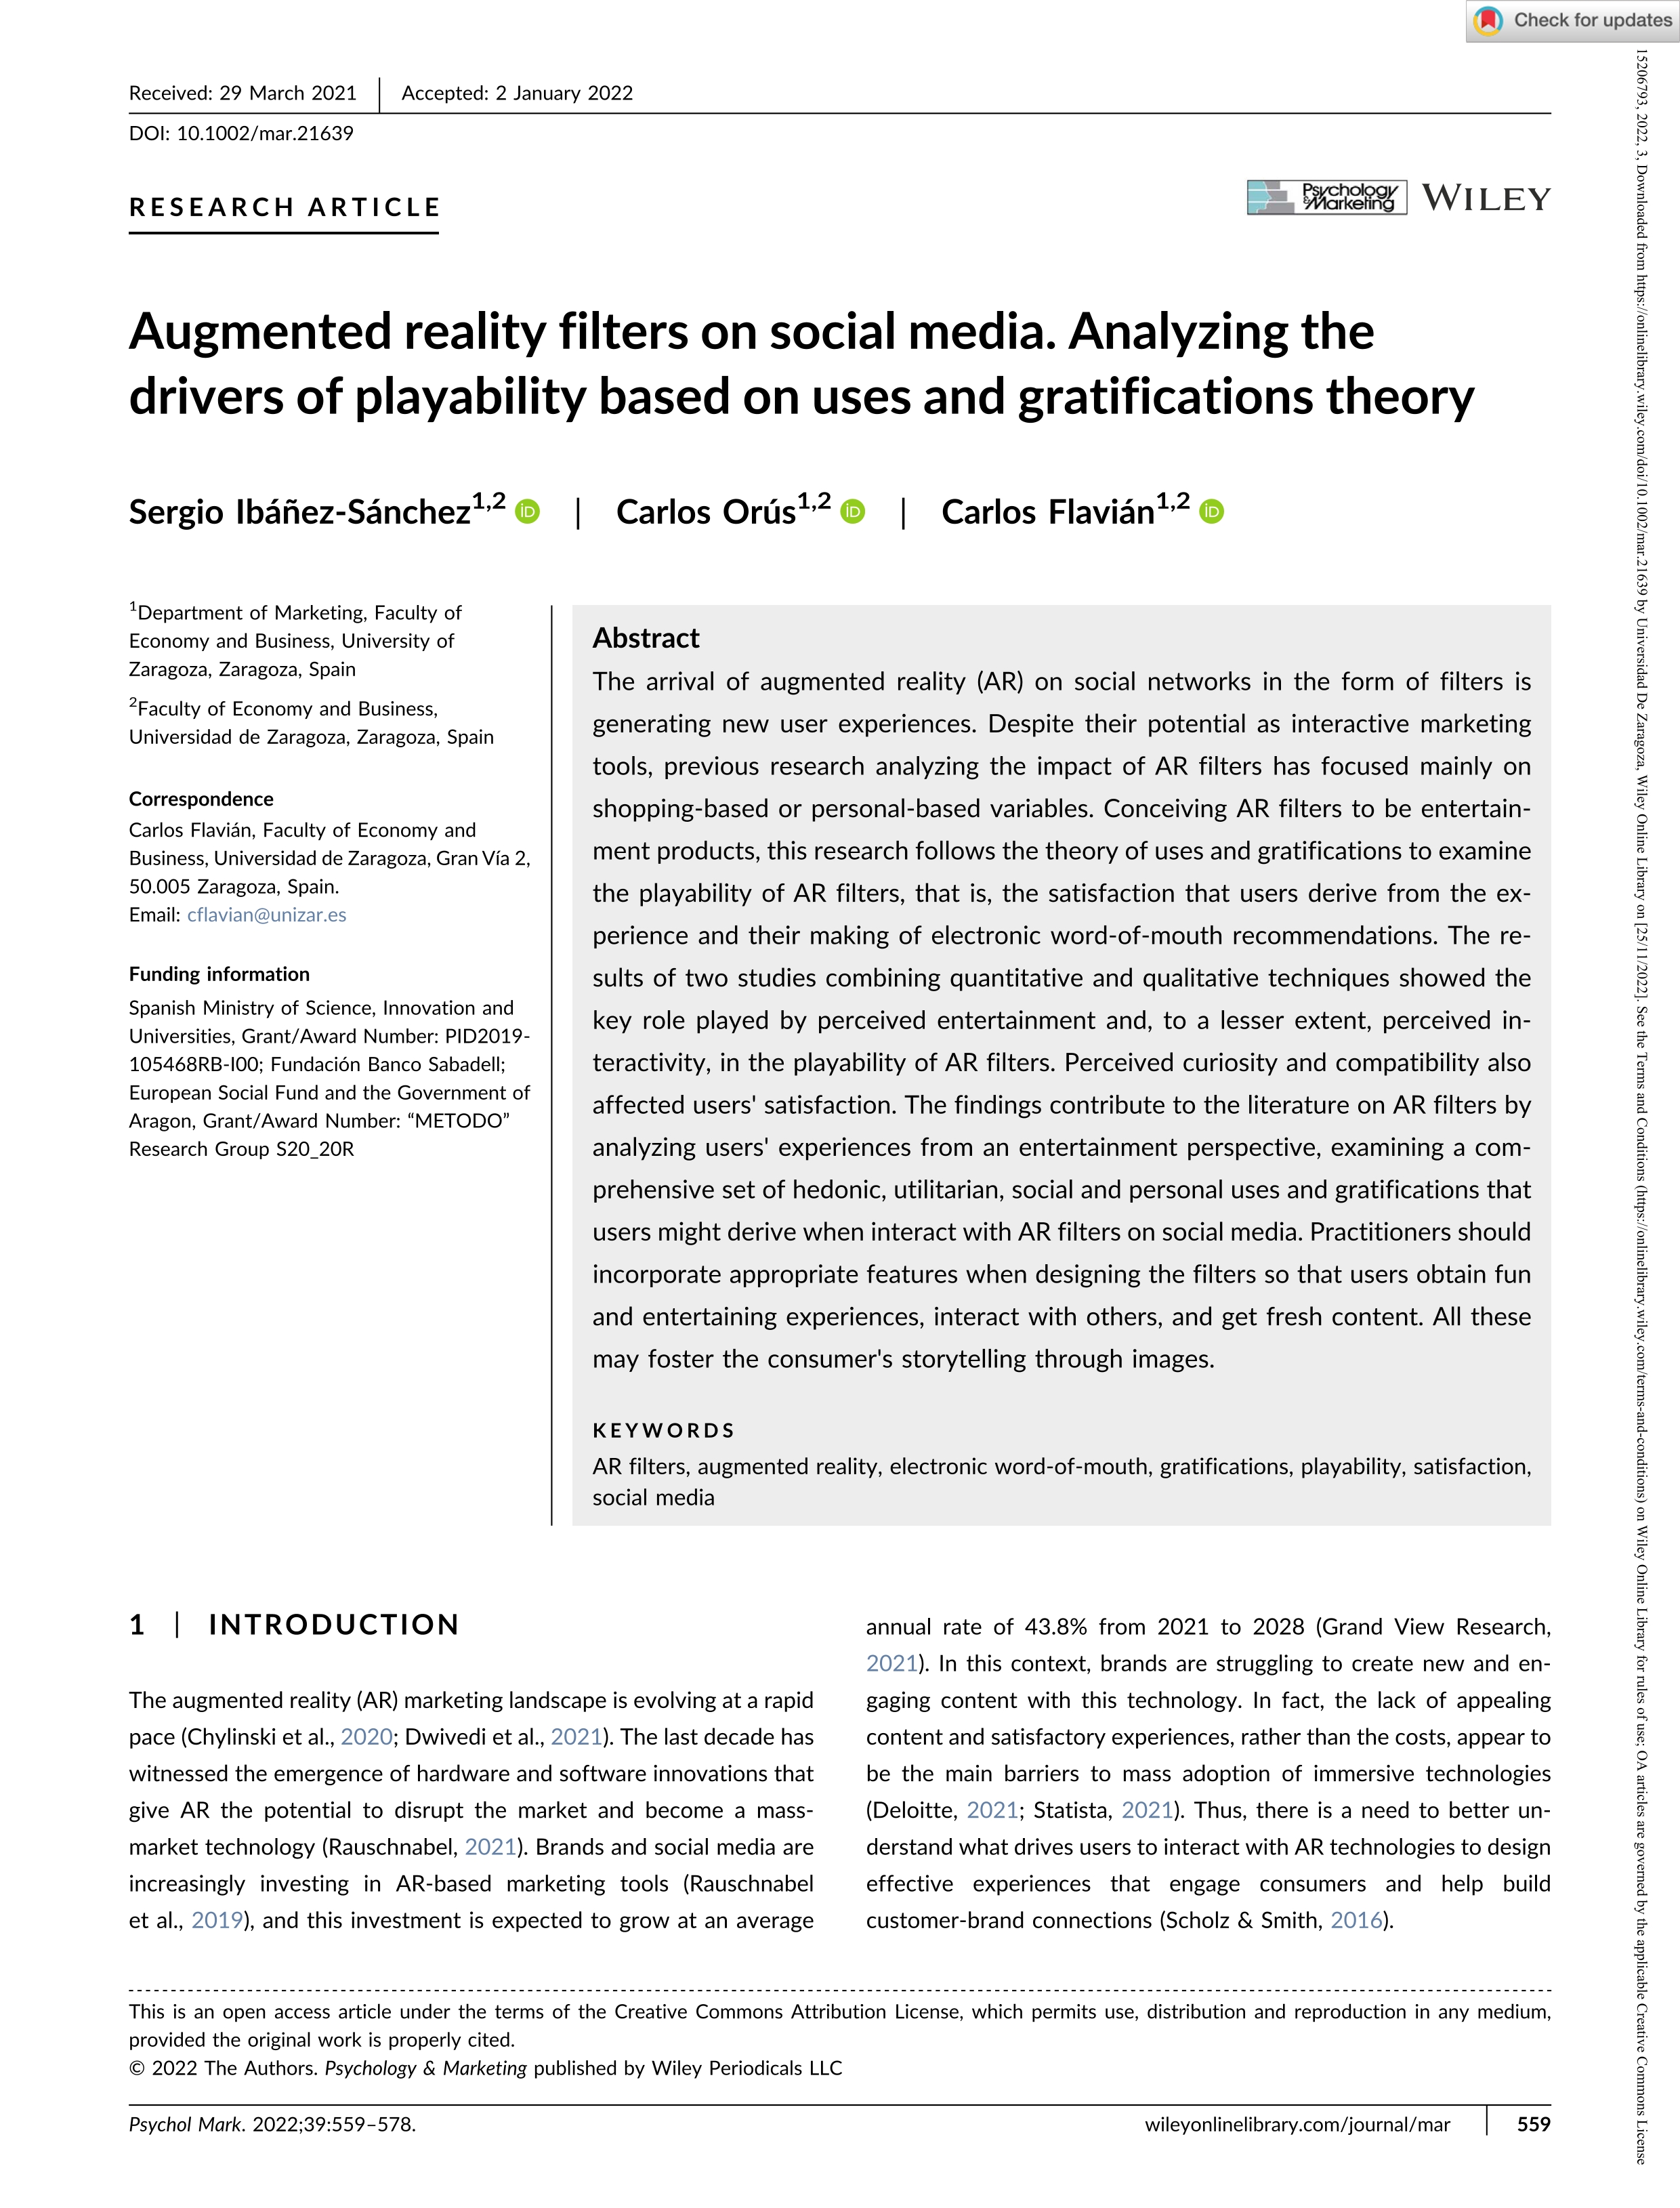 Augmented reality filters on social media. Analyzing the drivers of playability based on uses and gratifications theory